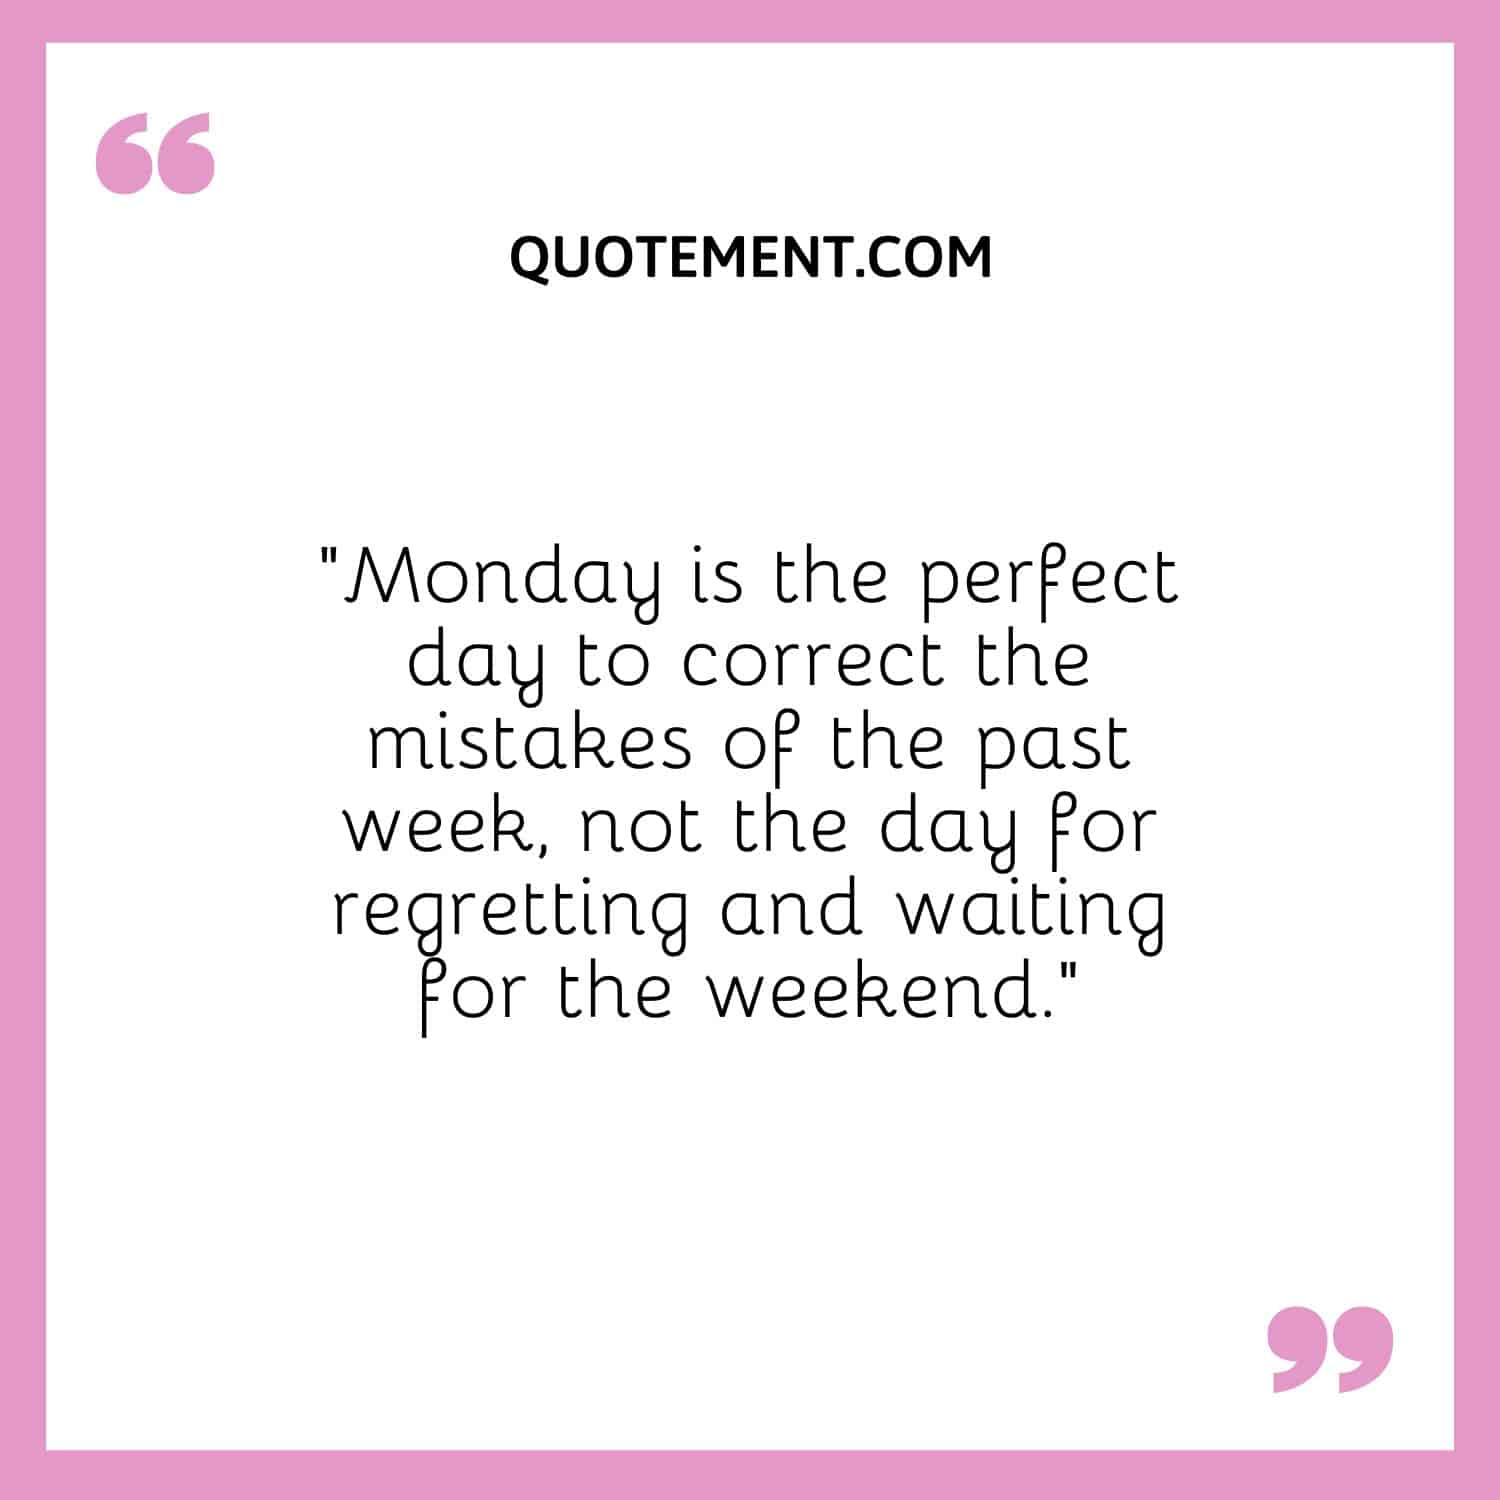 Monday is the perfect day to correct the mistakes of the past week